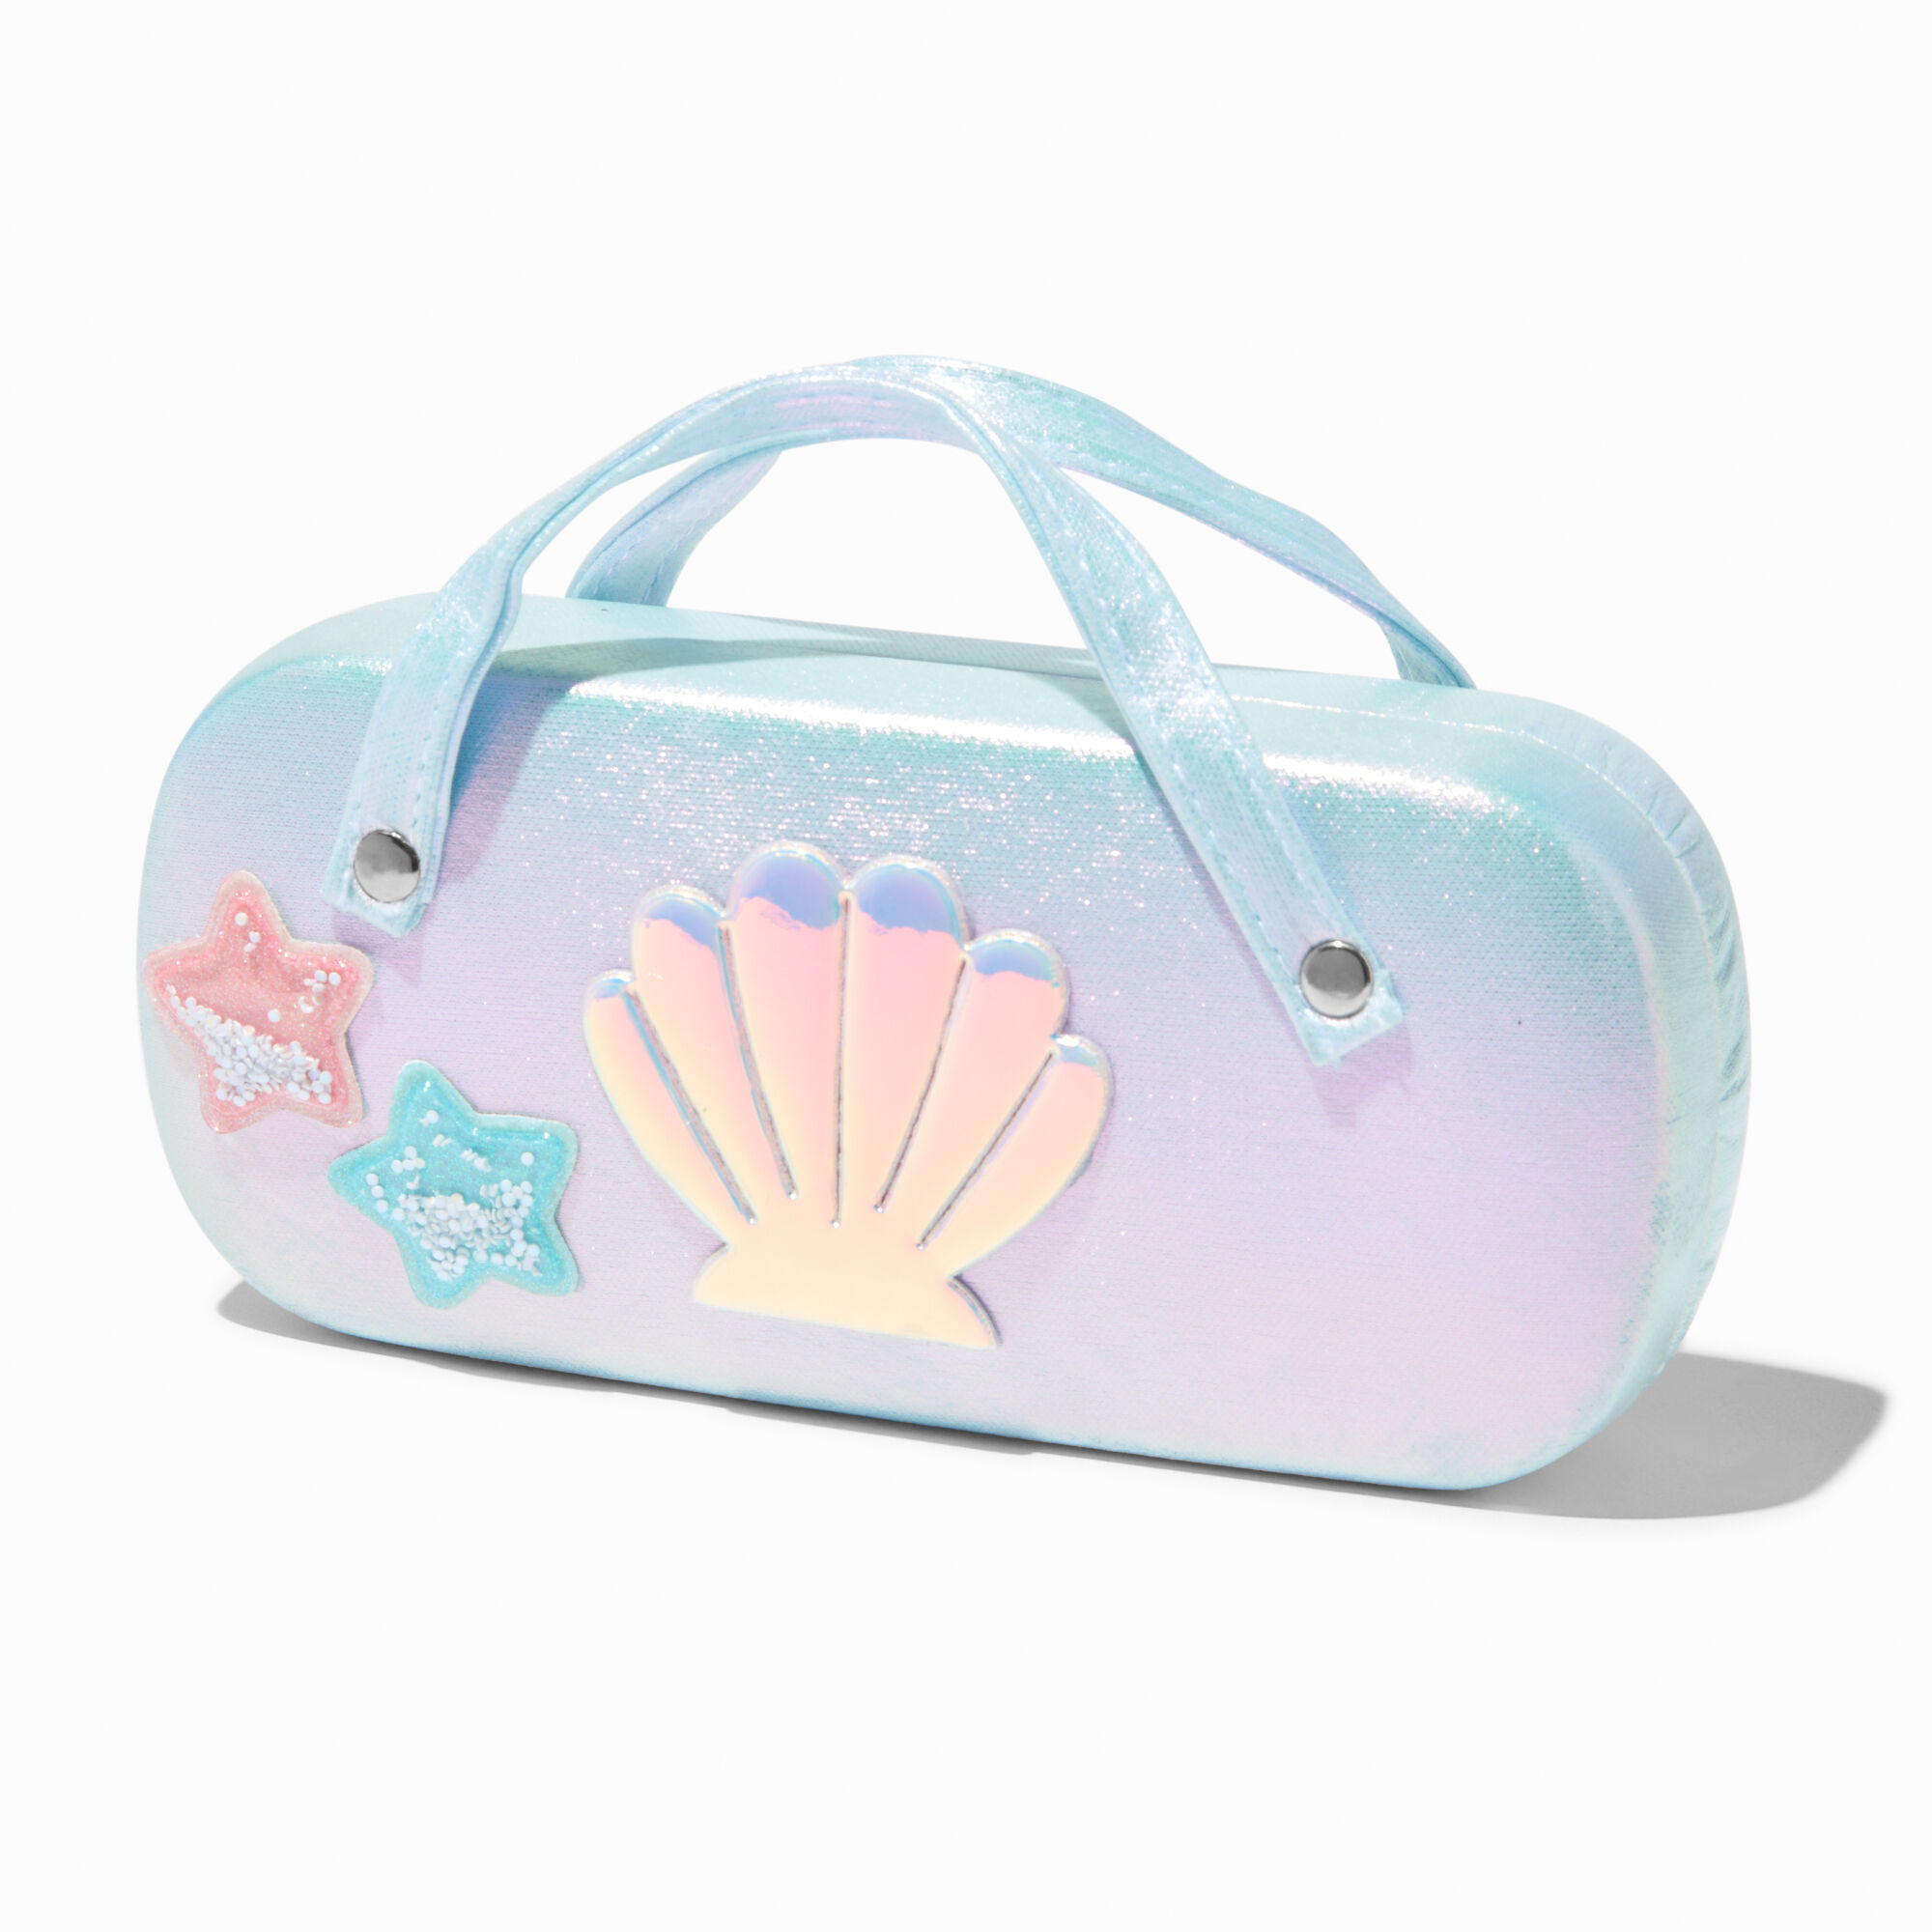 View Claires Club Iridescent Mermaid Glasses Case information